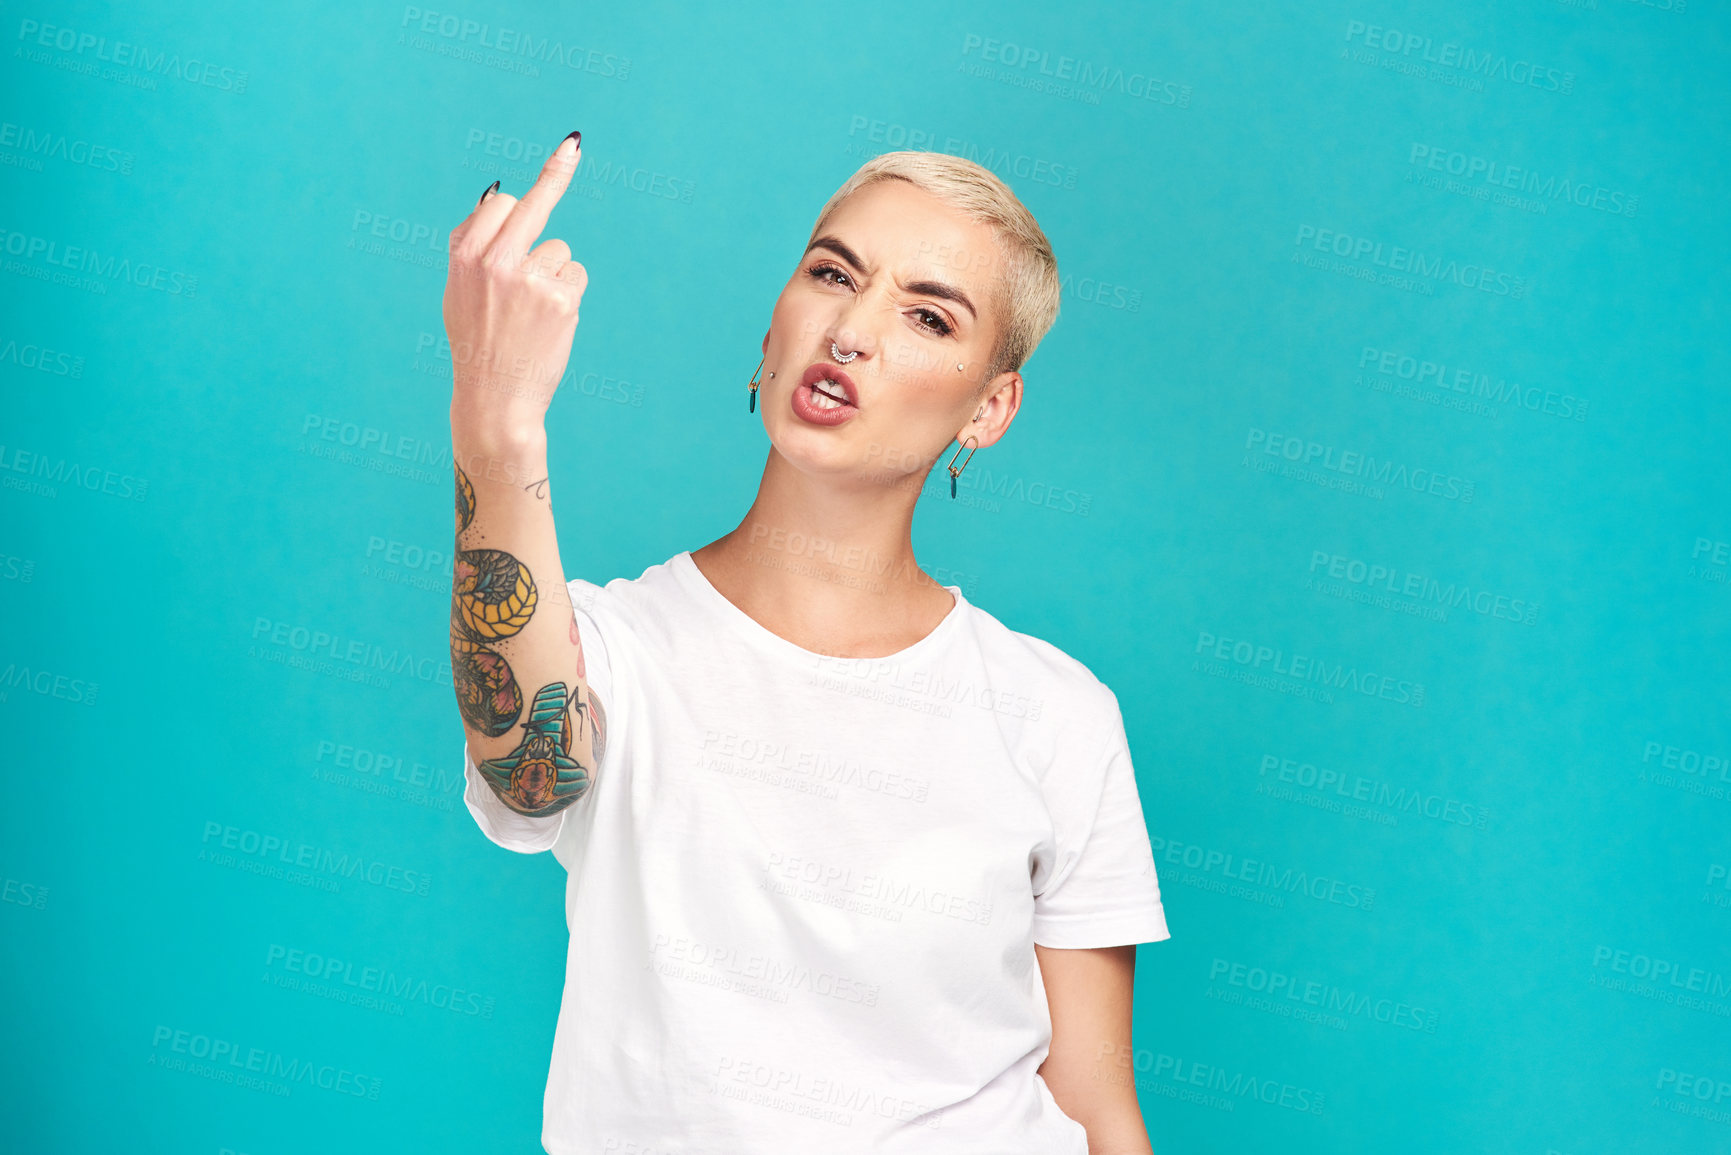 Buy stock photo Studio shot of a young woman showing her middle finger against a turquoise background